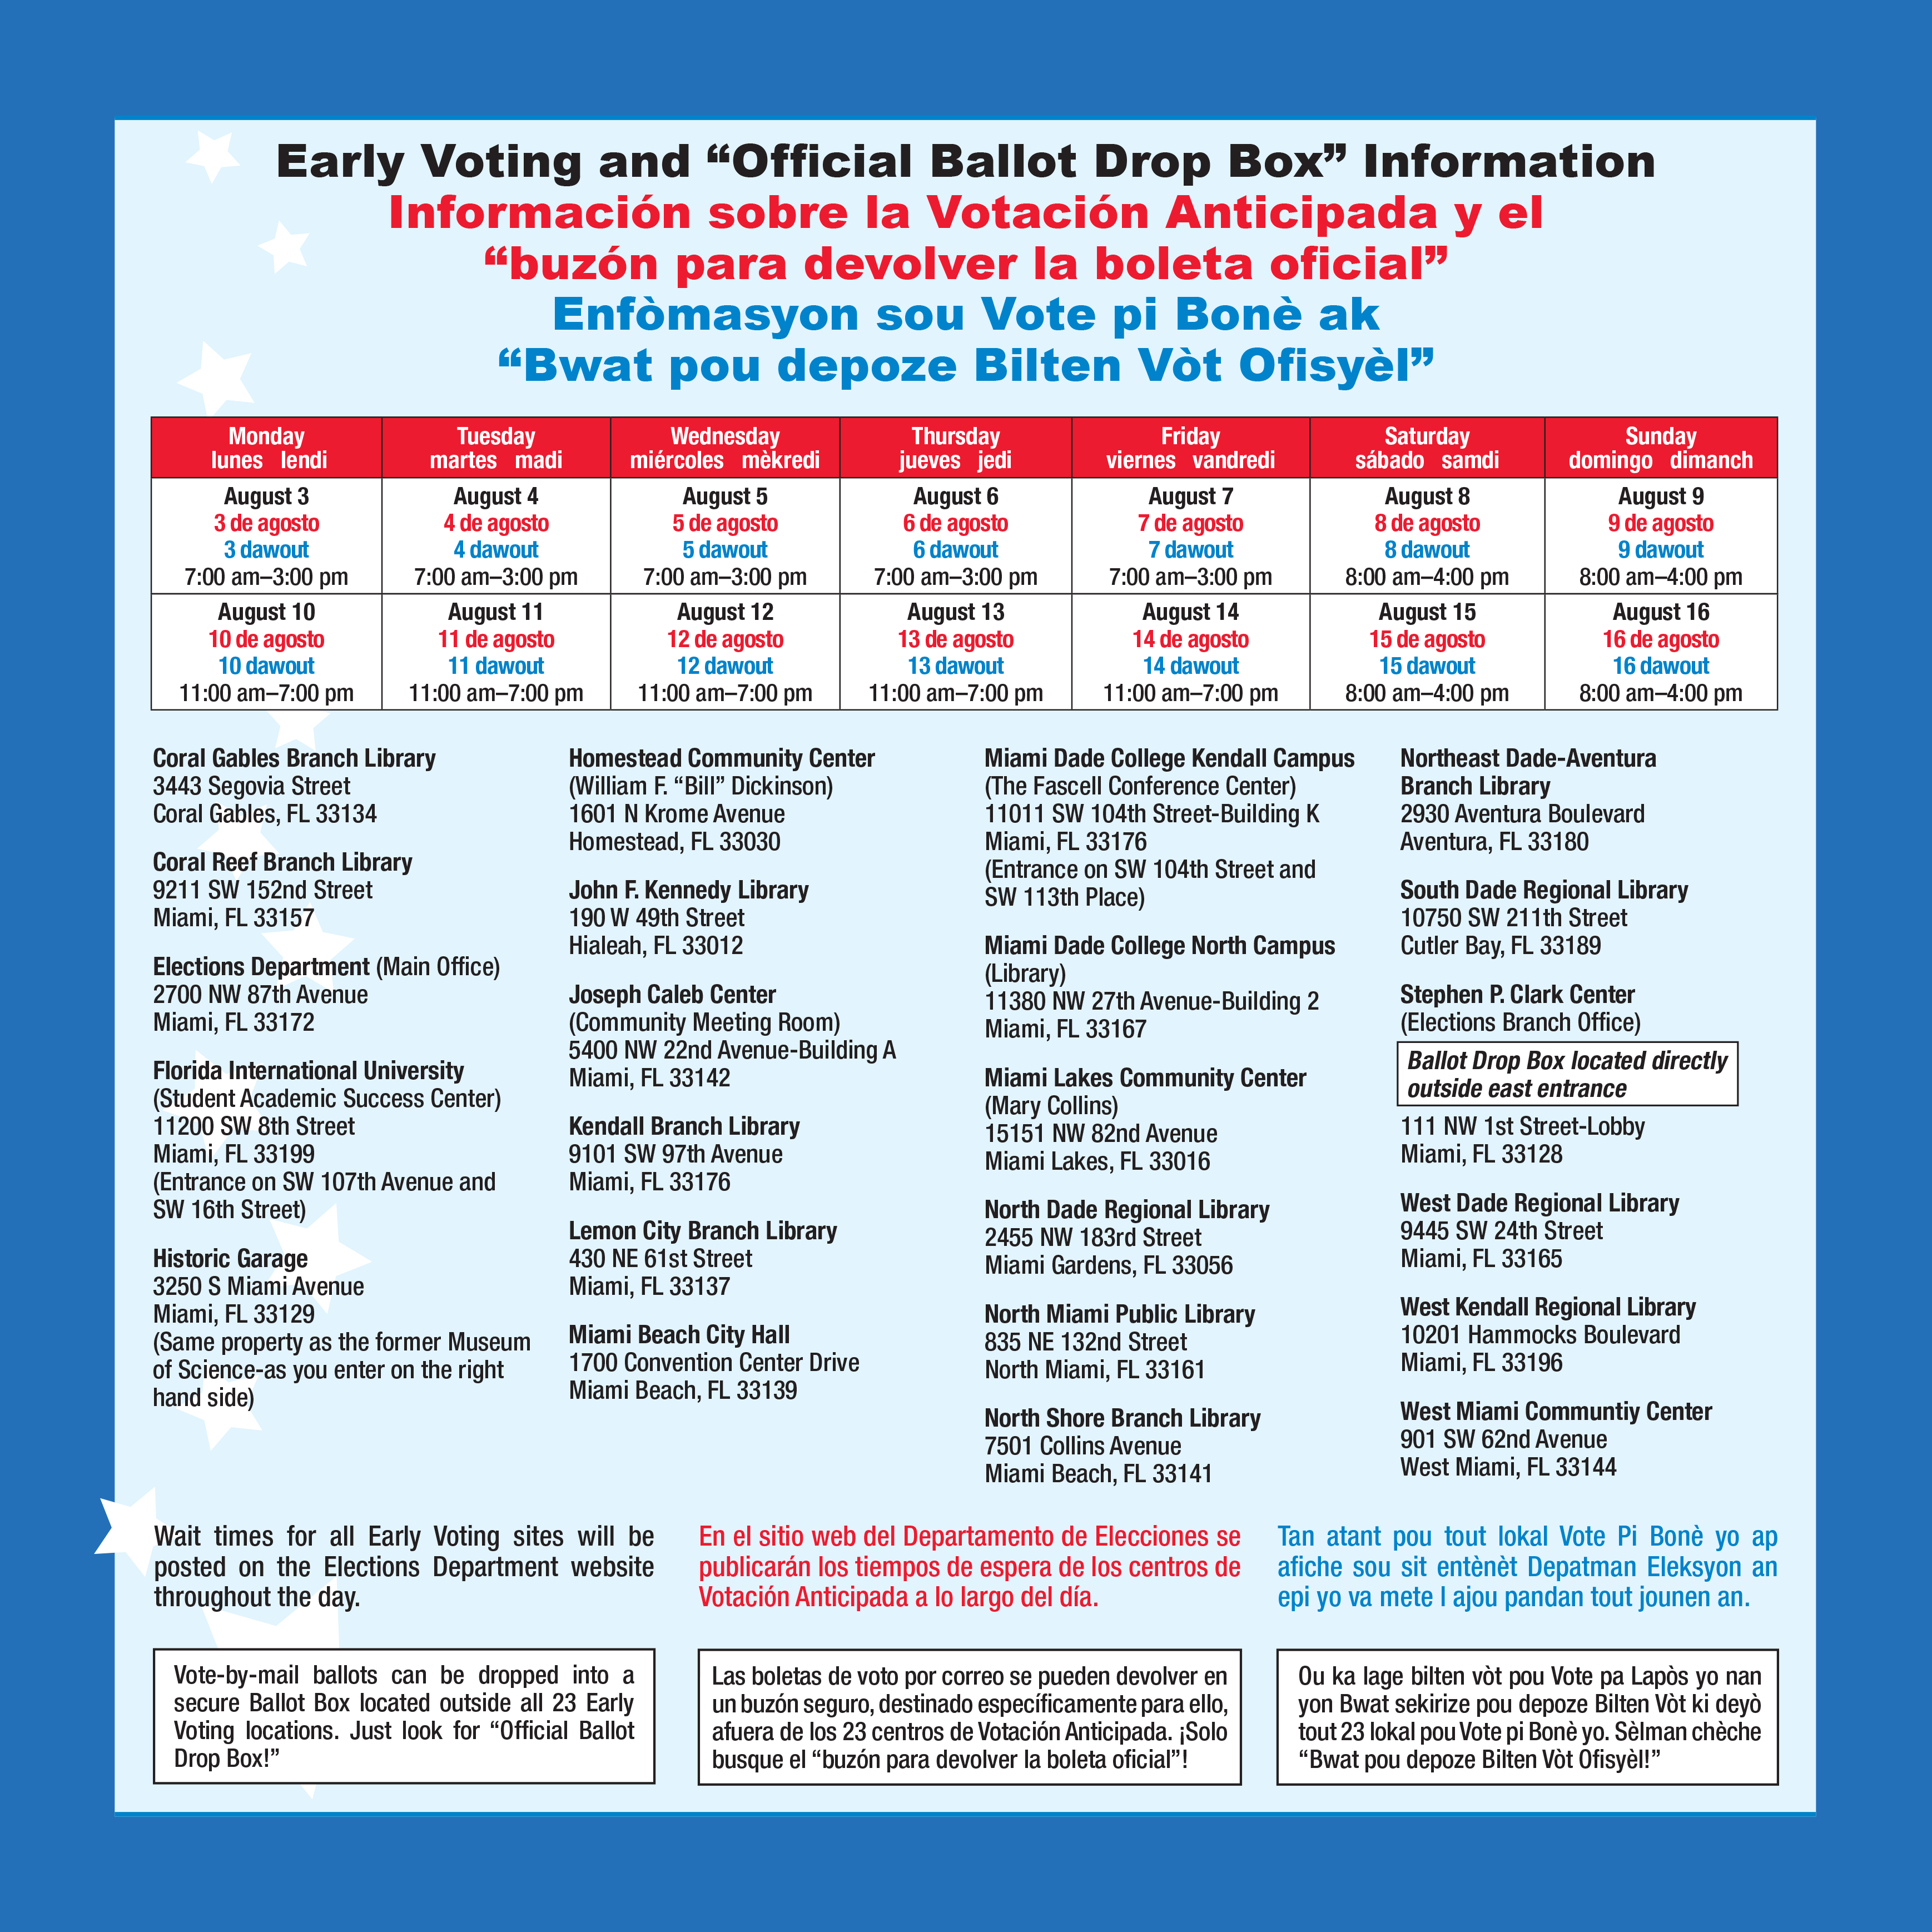 Early Voting locations and times